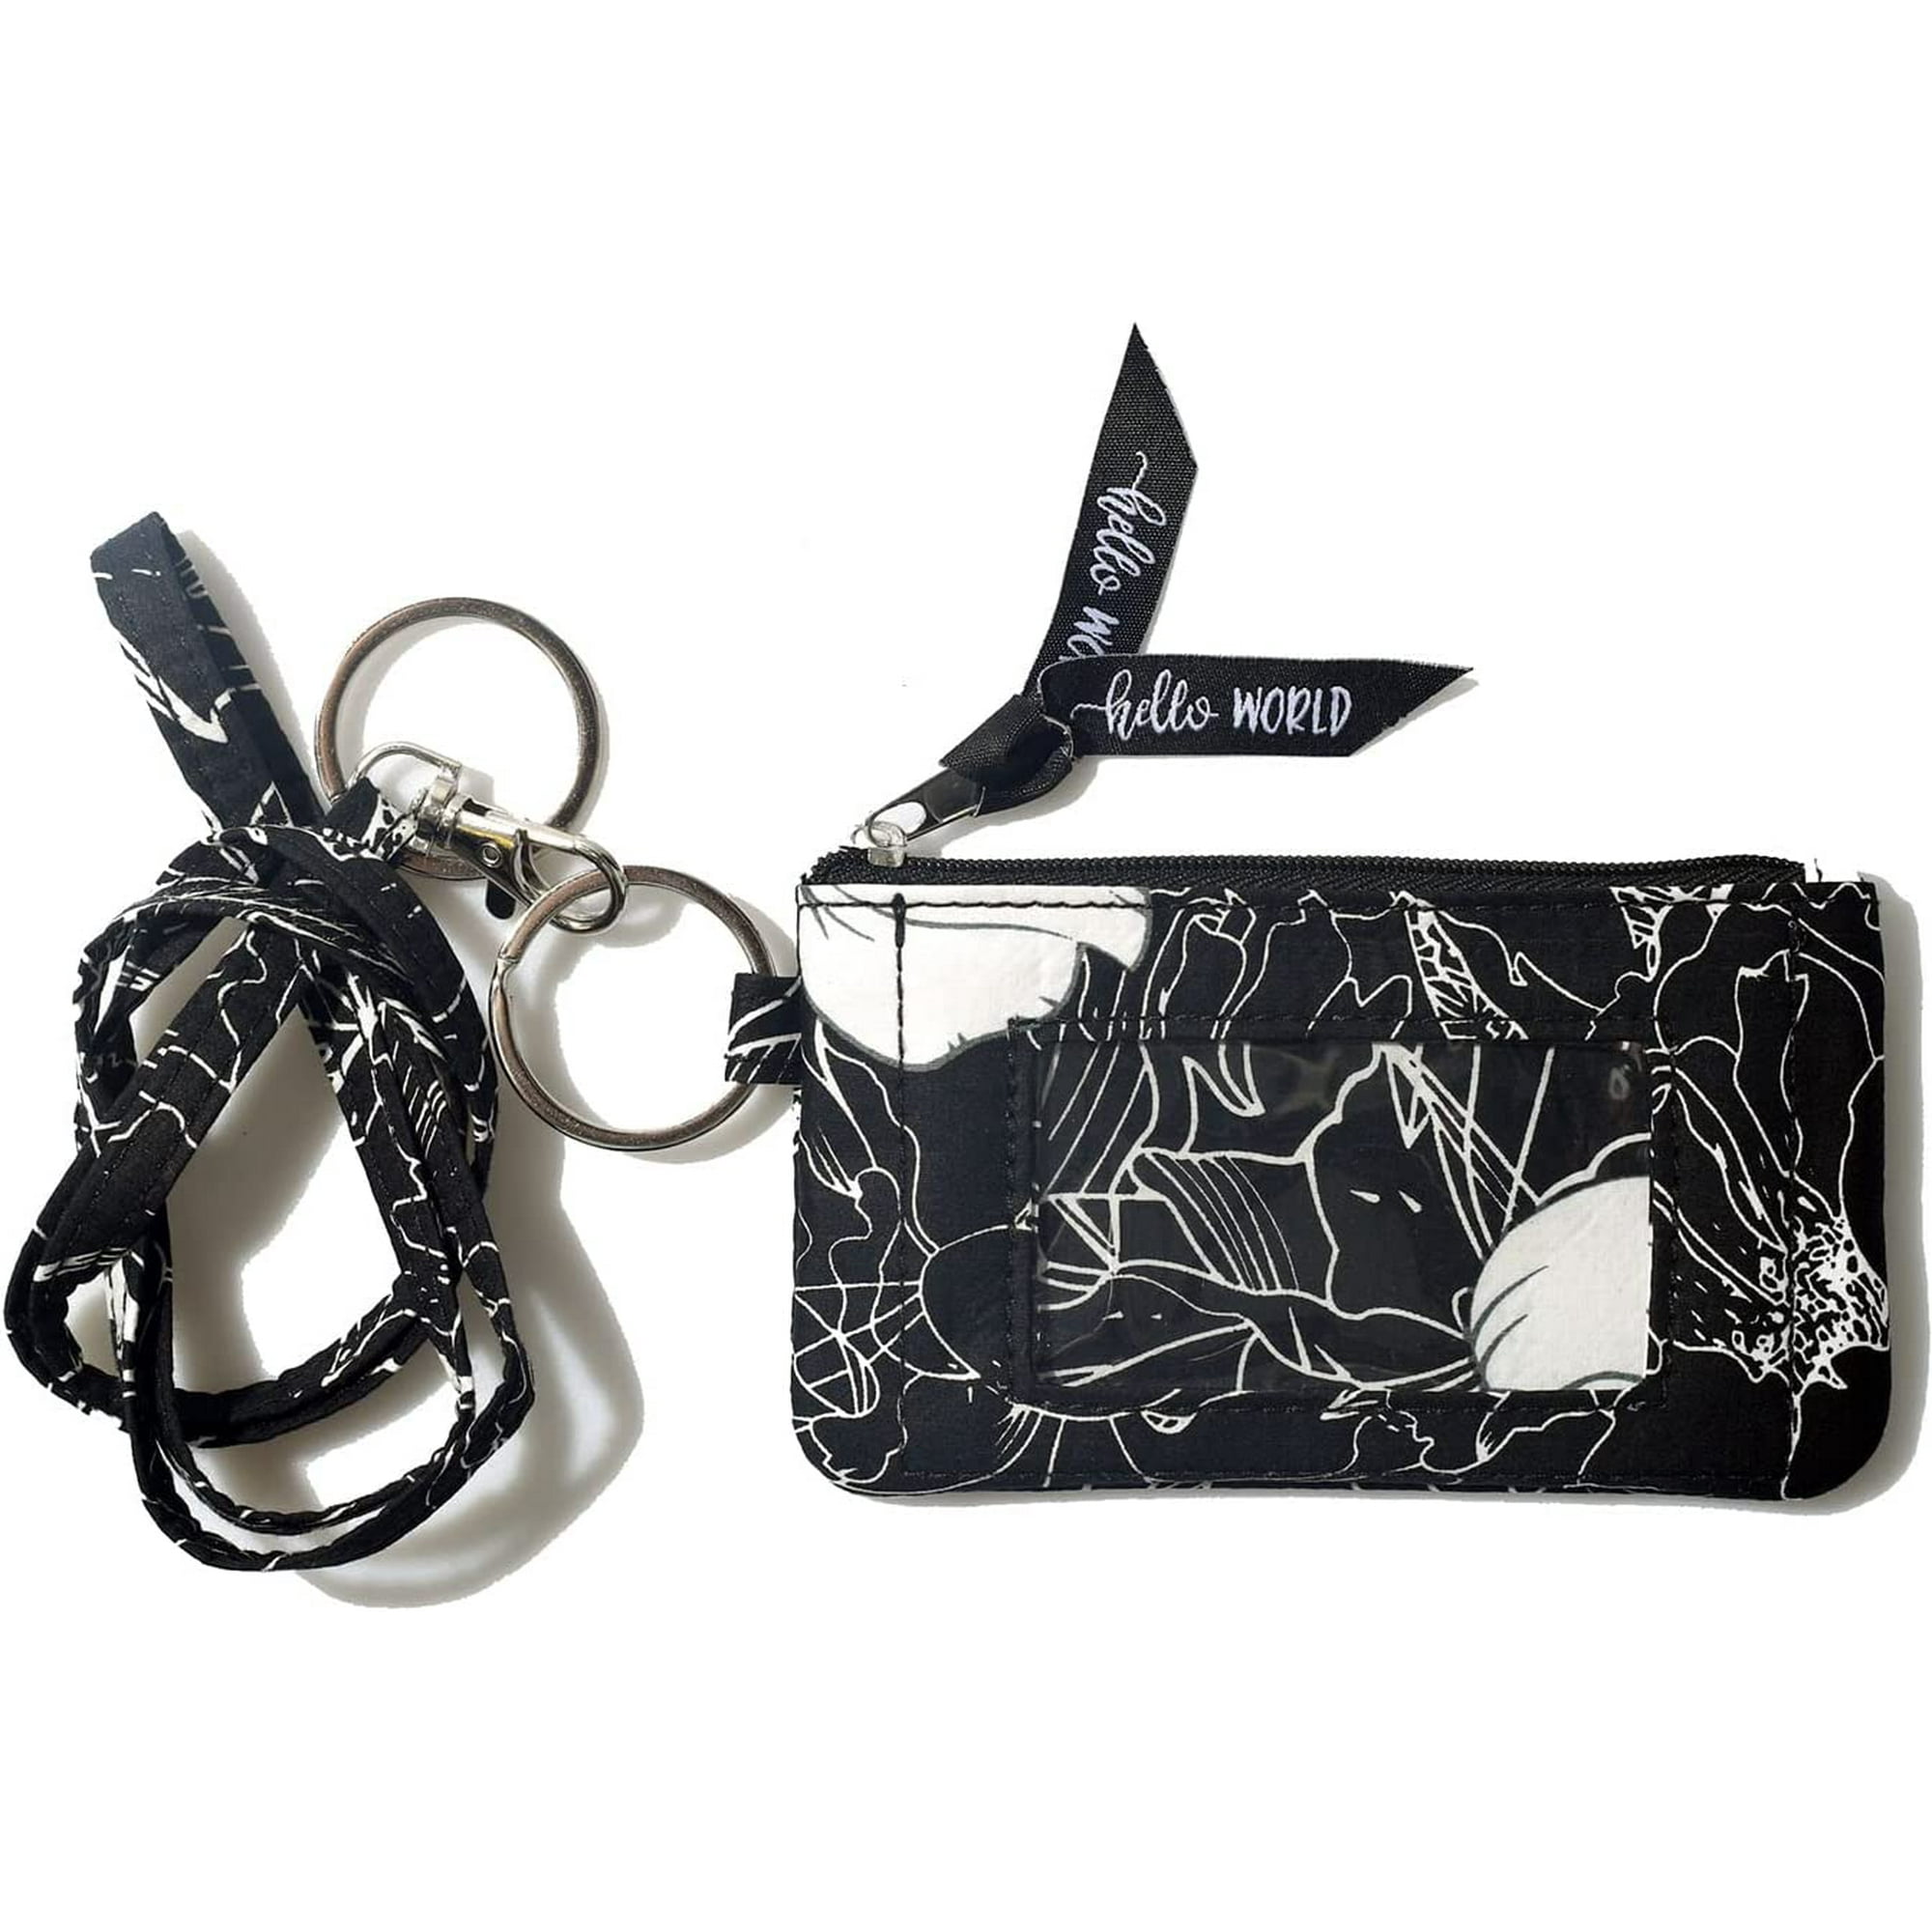 lanyards with Wallet ID Case Wallet with Lanyard, Lanyard Wallet Black, Zip  ID Case with Lanyard Lanyard with id Holder Wallet Keychain for Women,